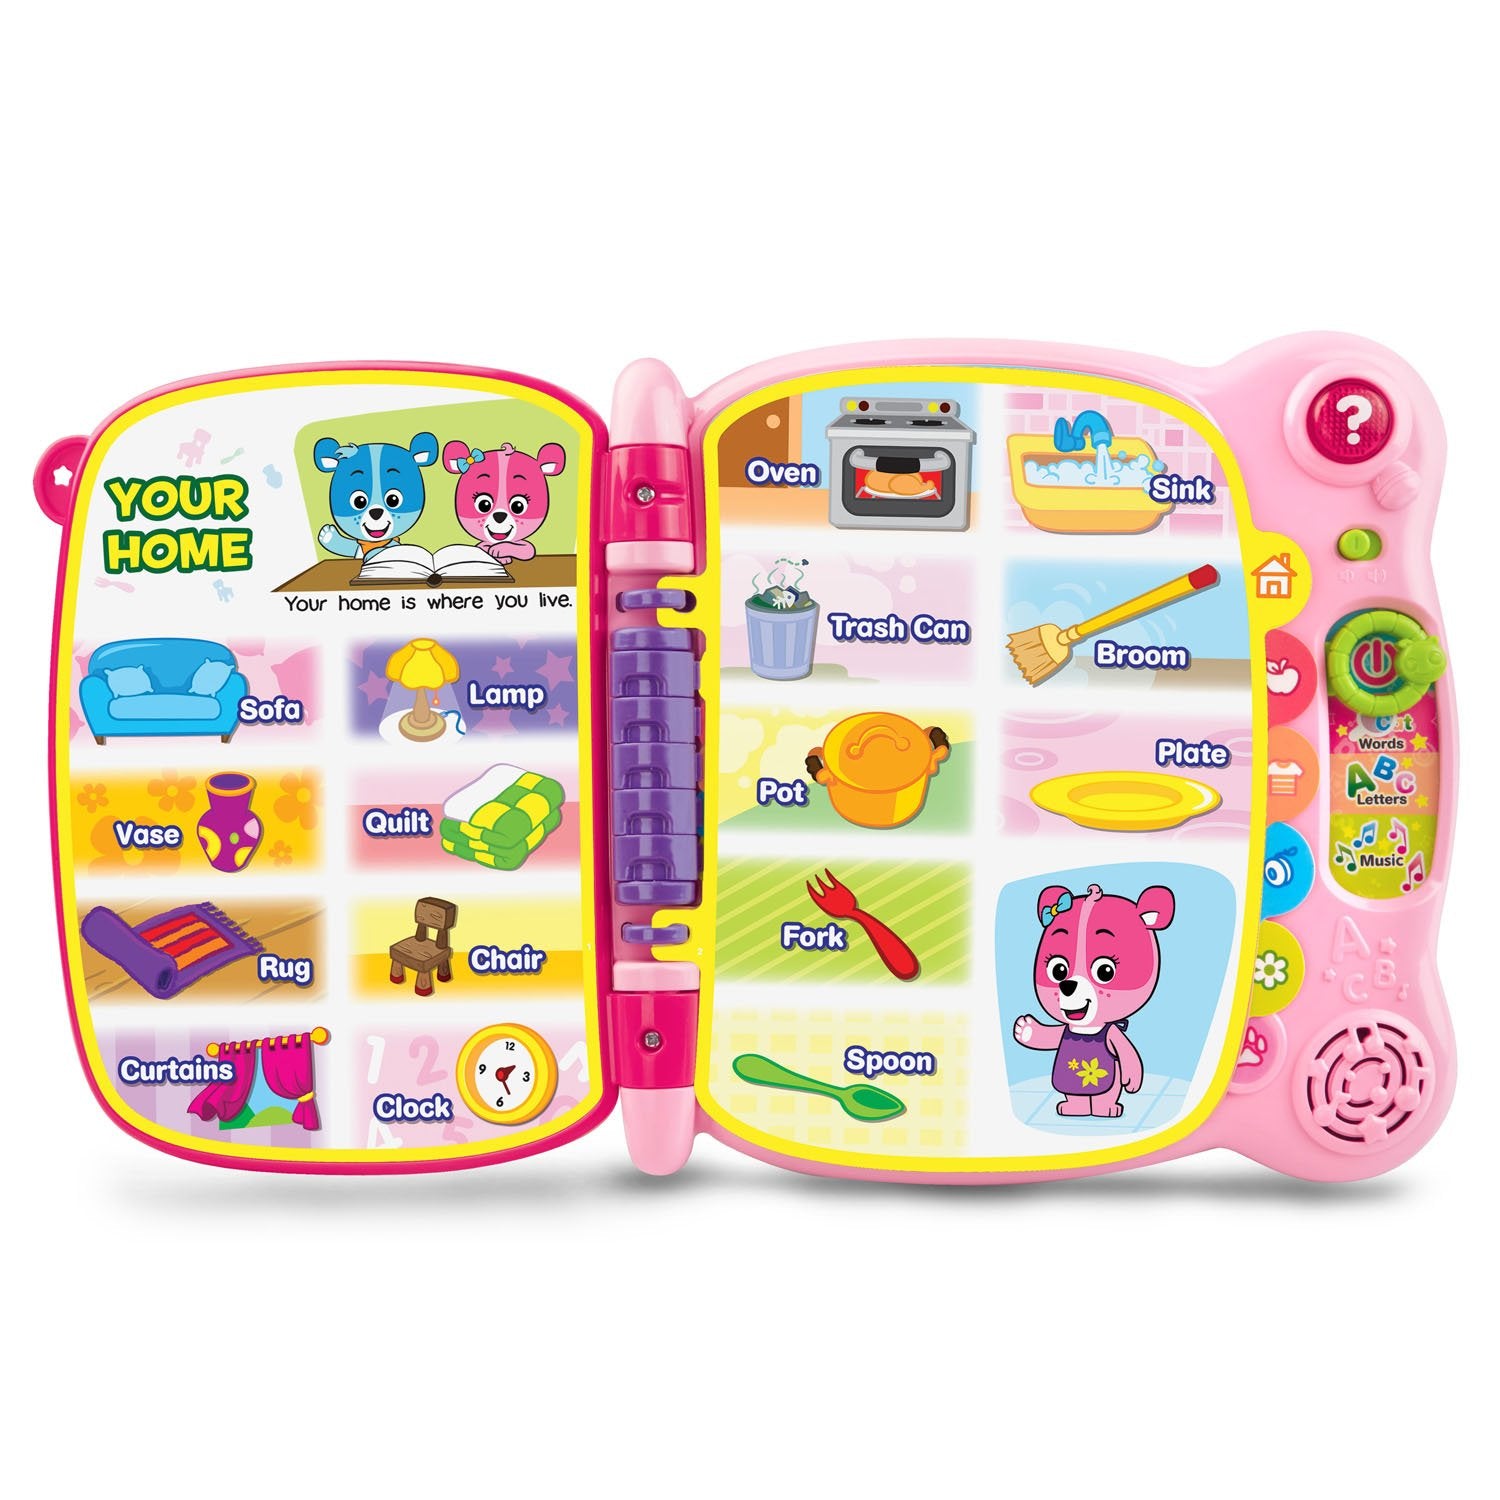 VTech Touch & Teach Word Book (Frustration Free Packaging)